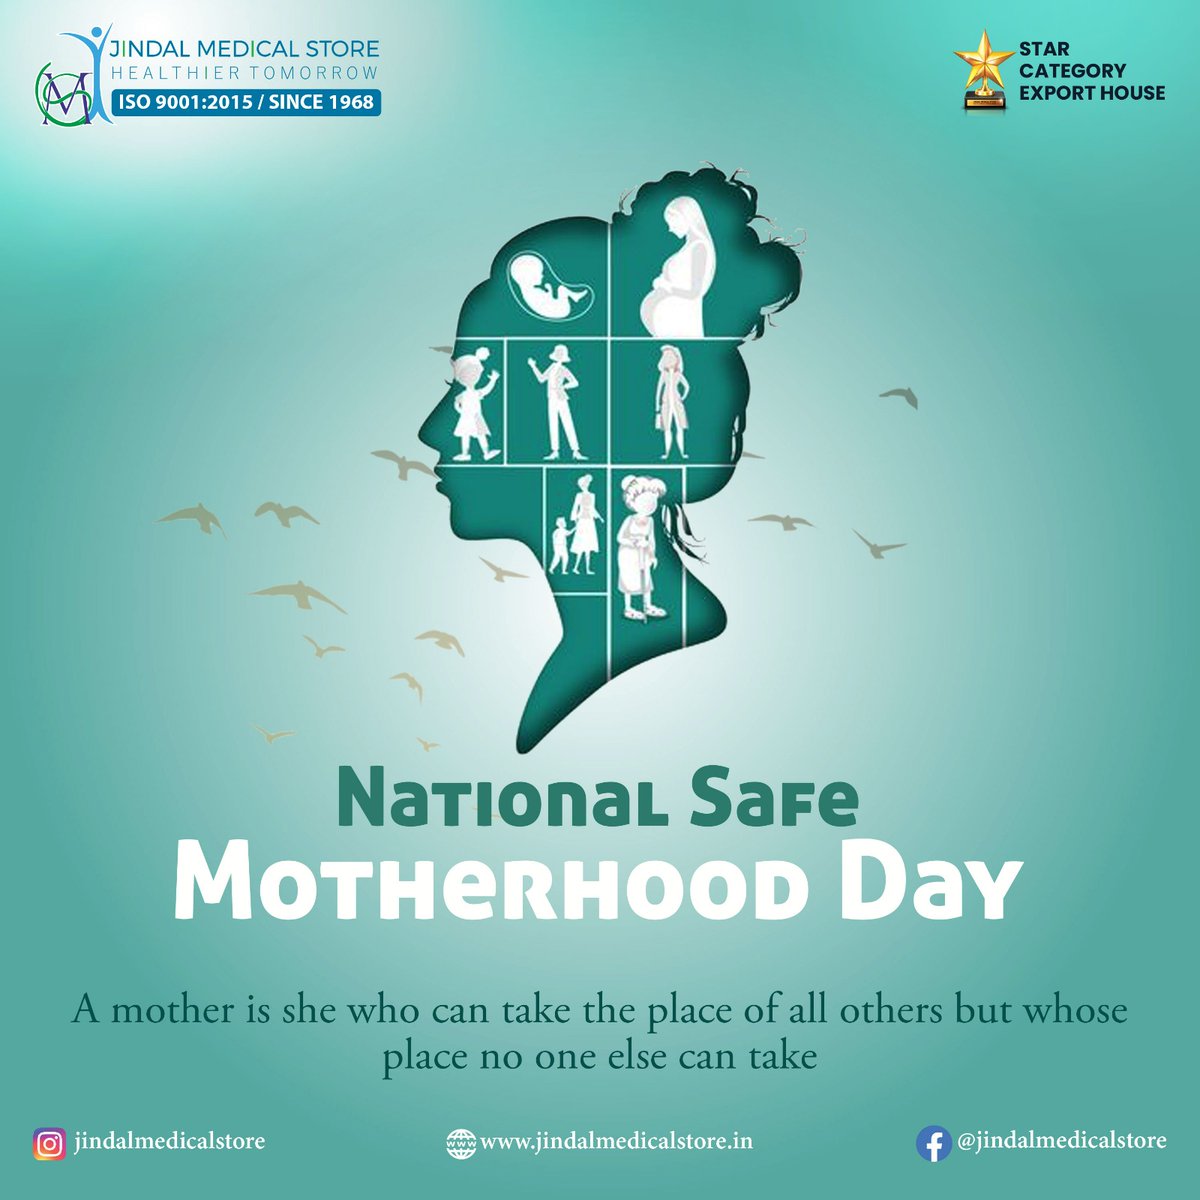 Every mother deserves to be safe, healthy, and supported on her journey to motherhood. On Safe Motherhood Day, let us pledge to prioritize the well-being of all mothers

#NationalSafeMotherhoodDay  #HealthyMotherhood    #JindalMedicalStore #Jms